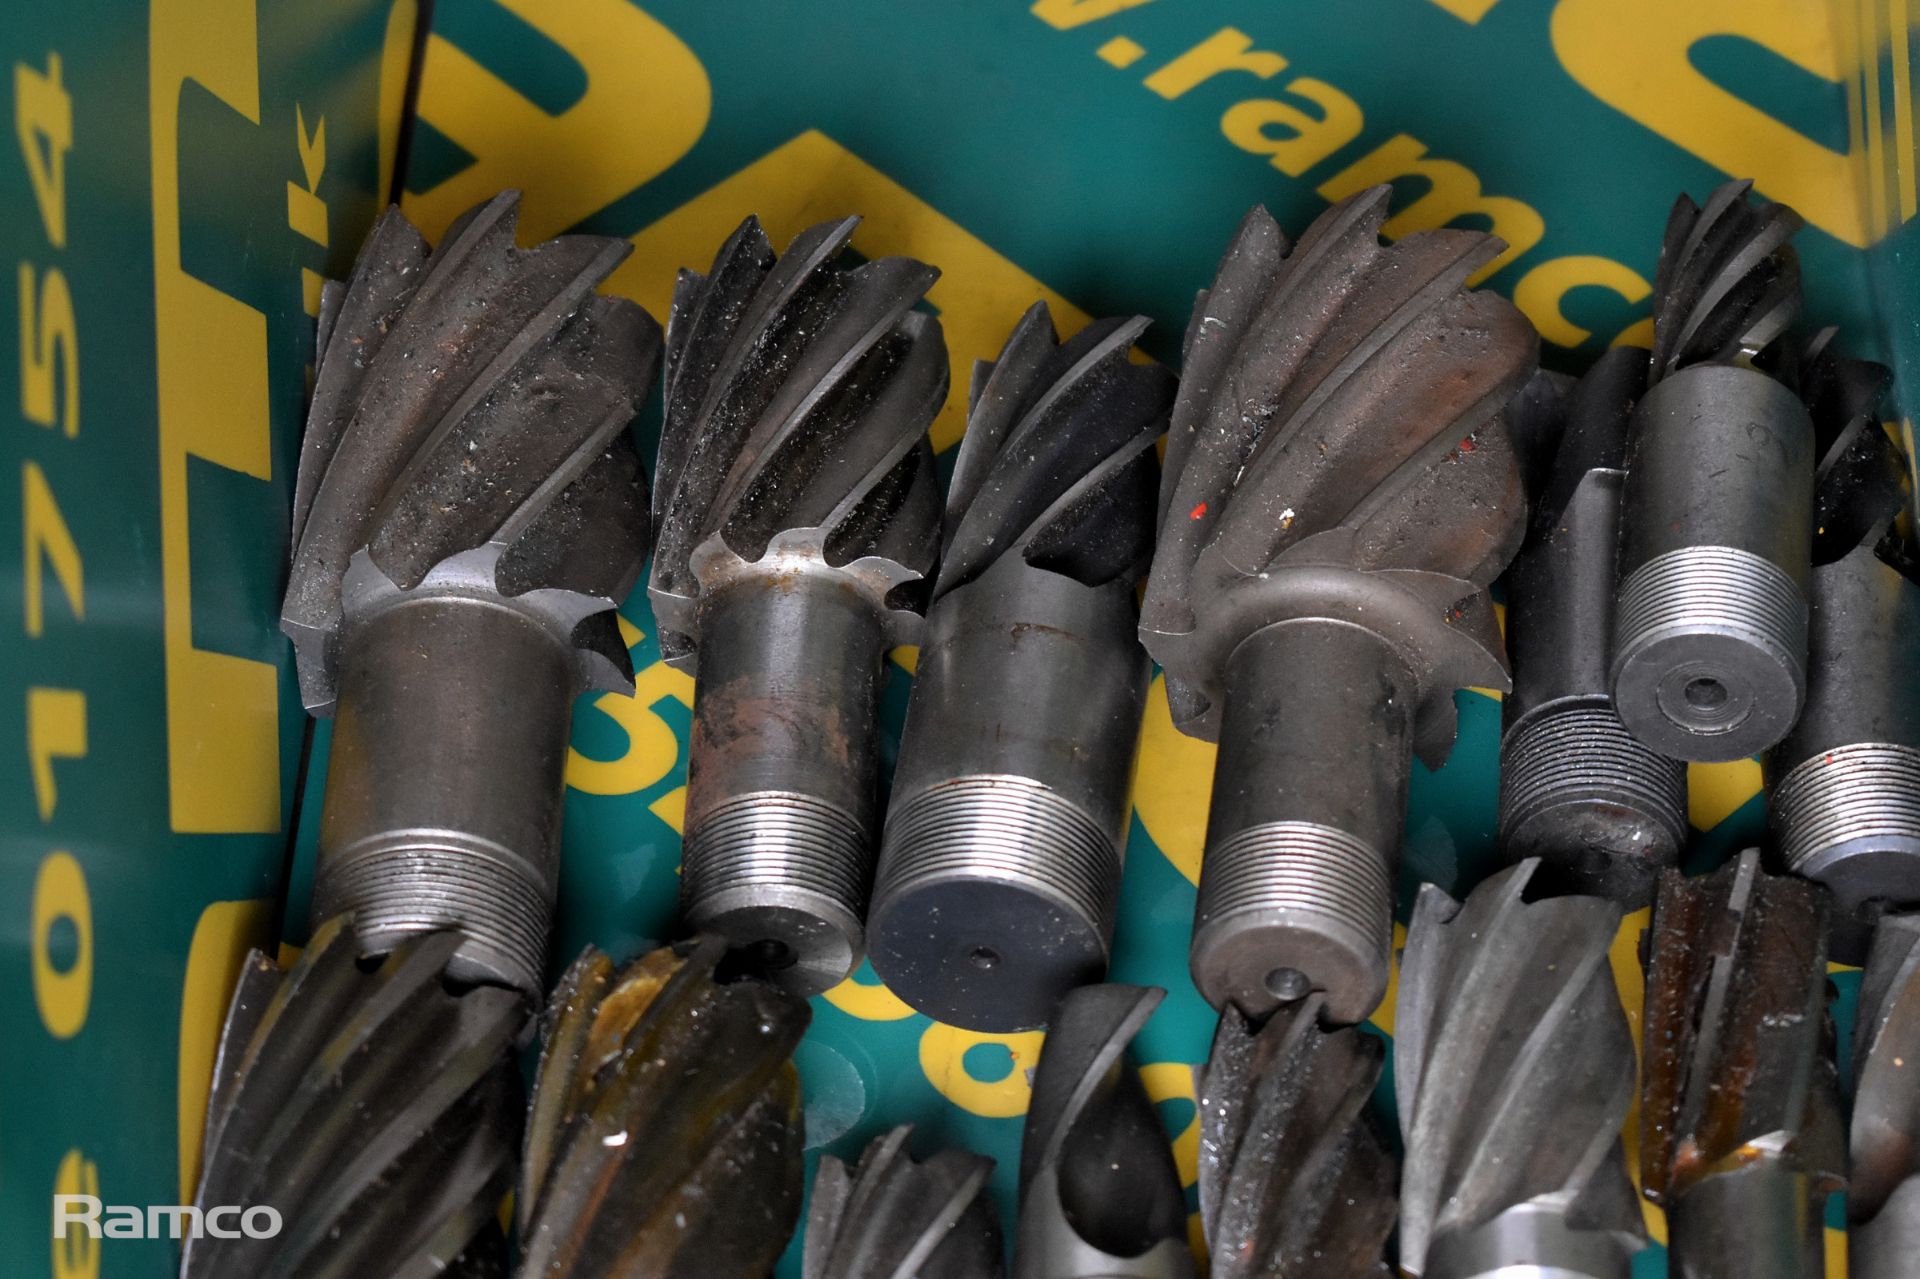 15x HSS drill bits in various sizes - Image 2 of 3